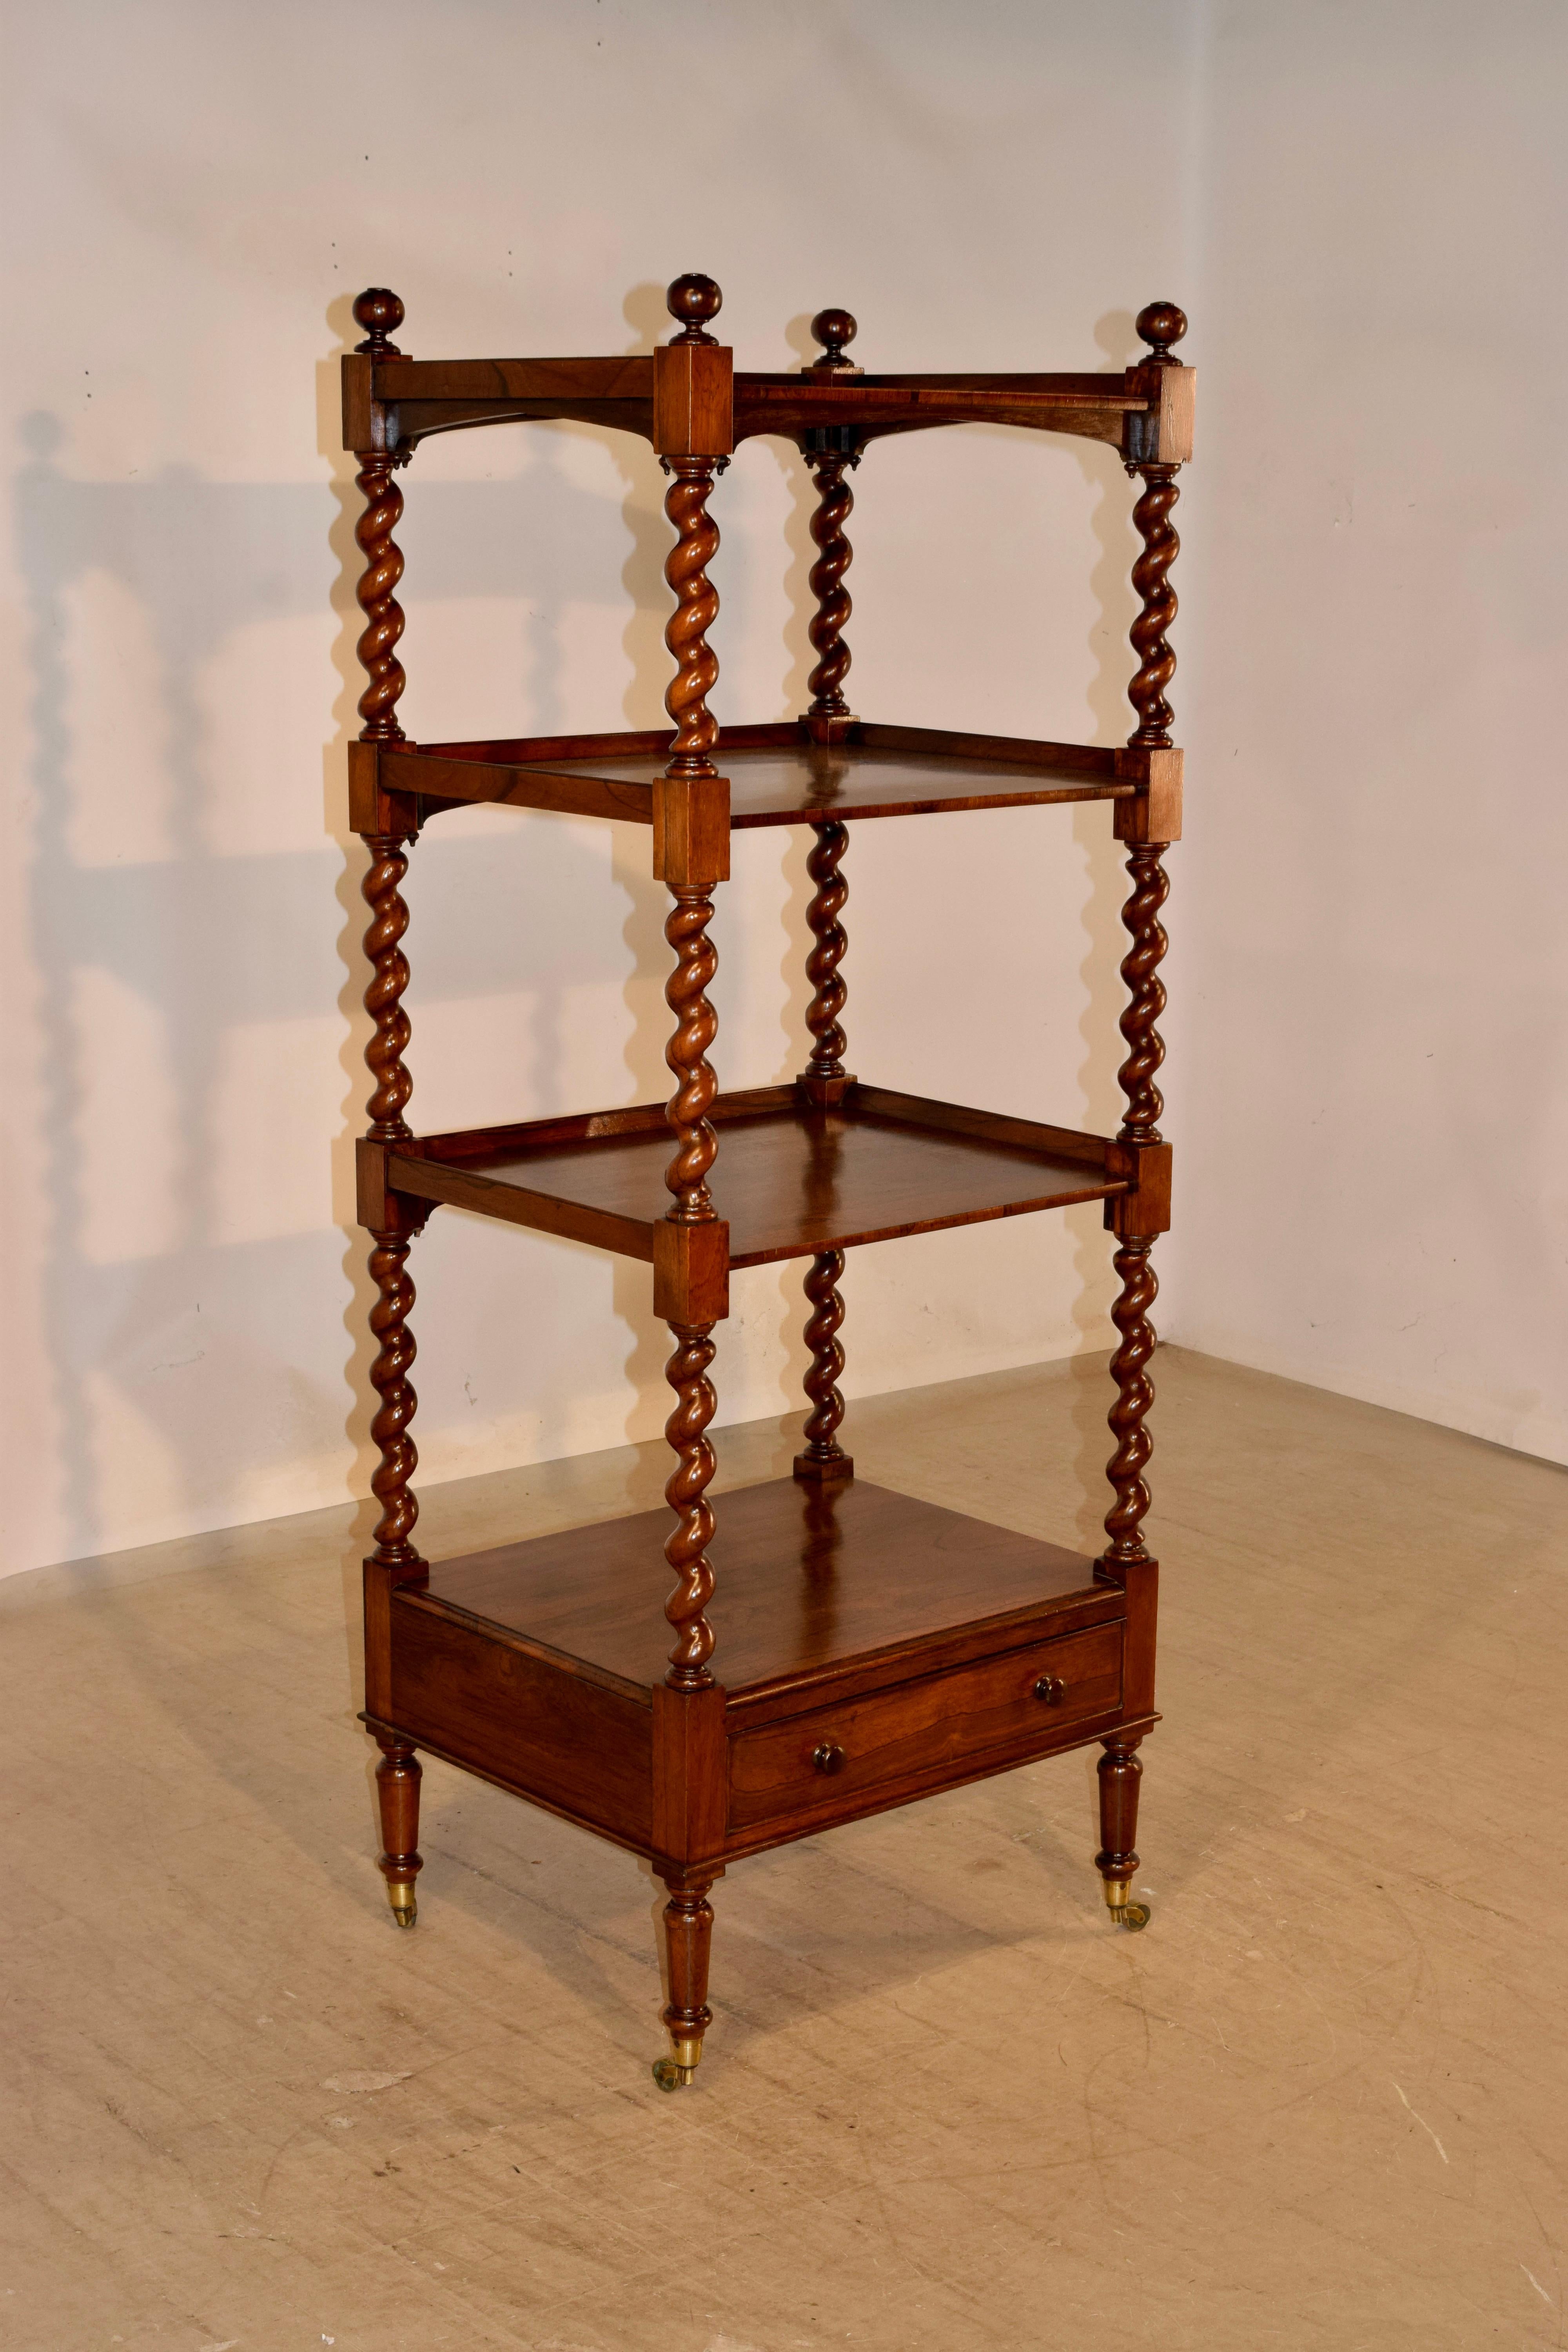 19th century rosewood whatnot shelf from England with three shelves with galleries, all separated by hand turned barley twist shelf supports, over a lower shelf which has a single drawer beneath it. The piece is raised on hand turned legs on what